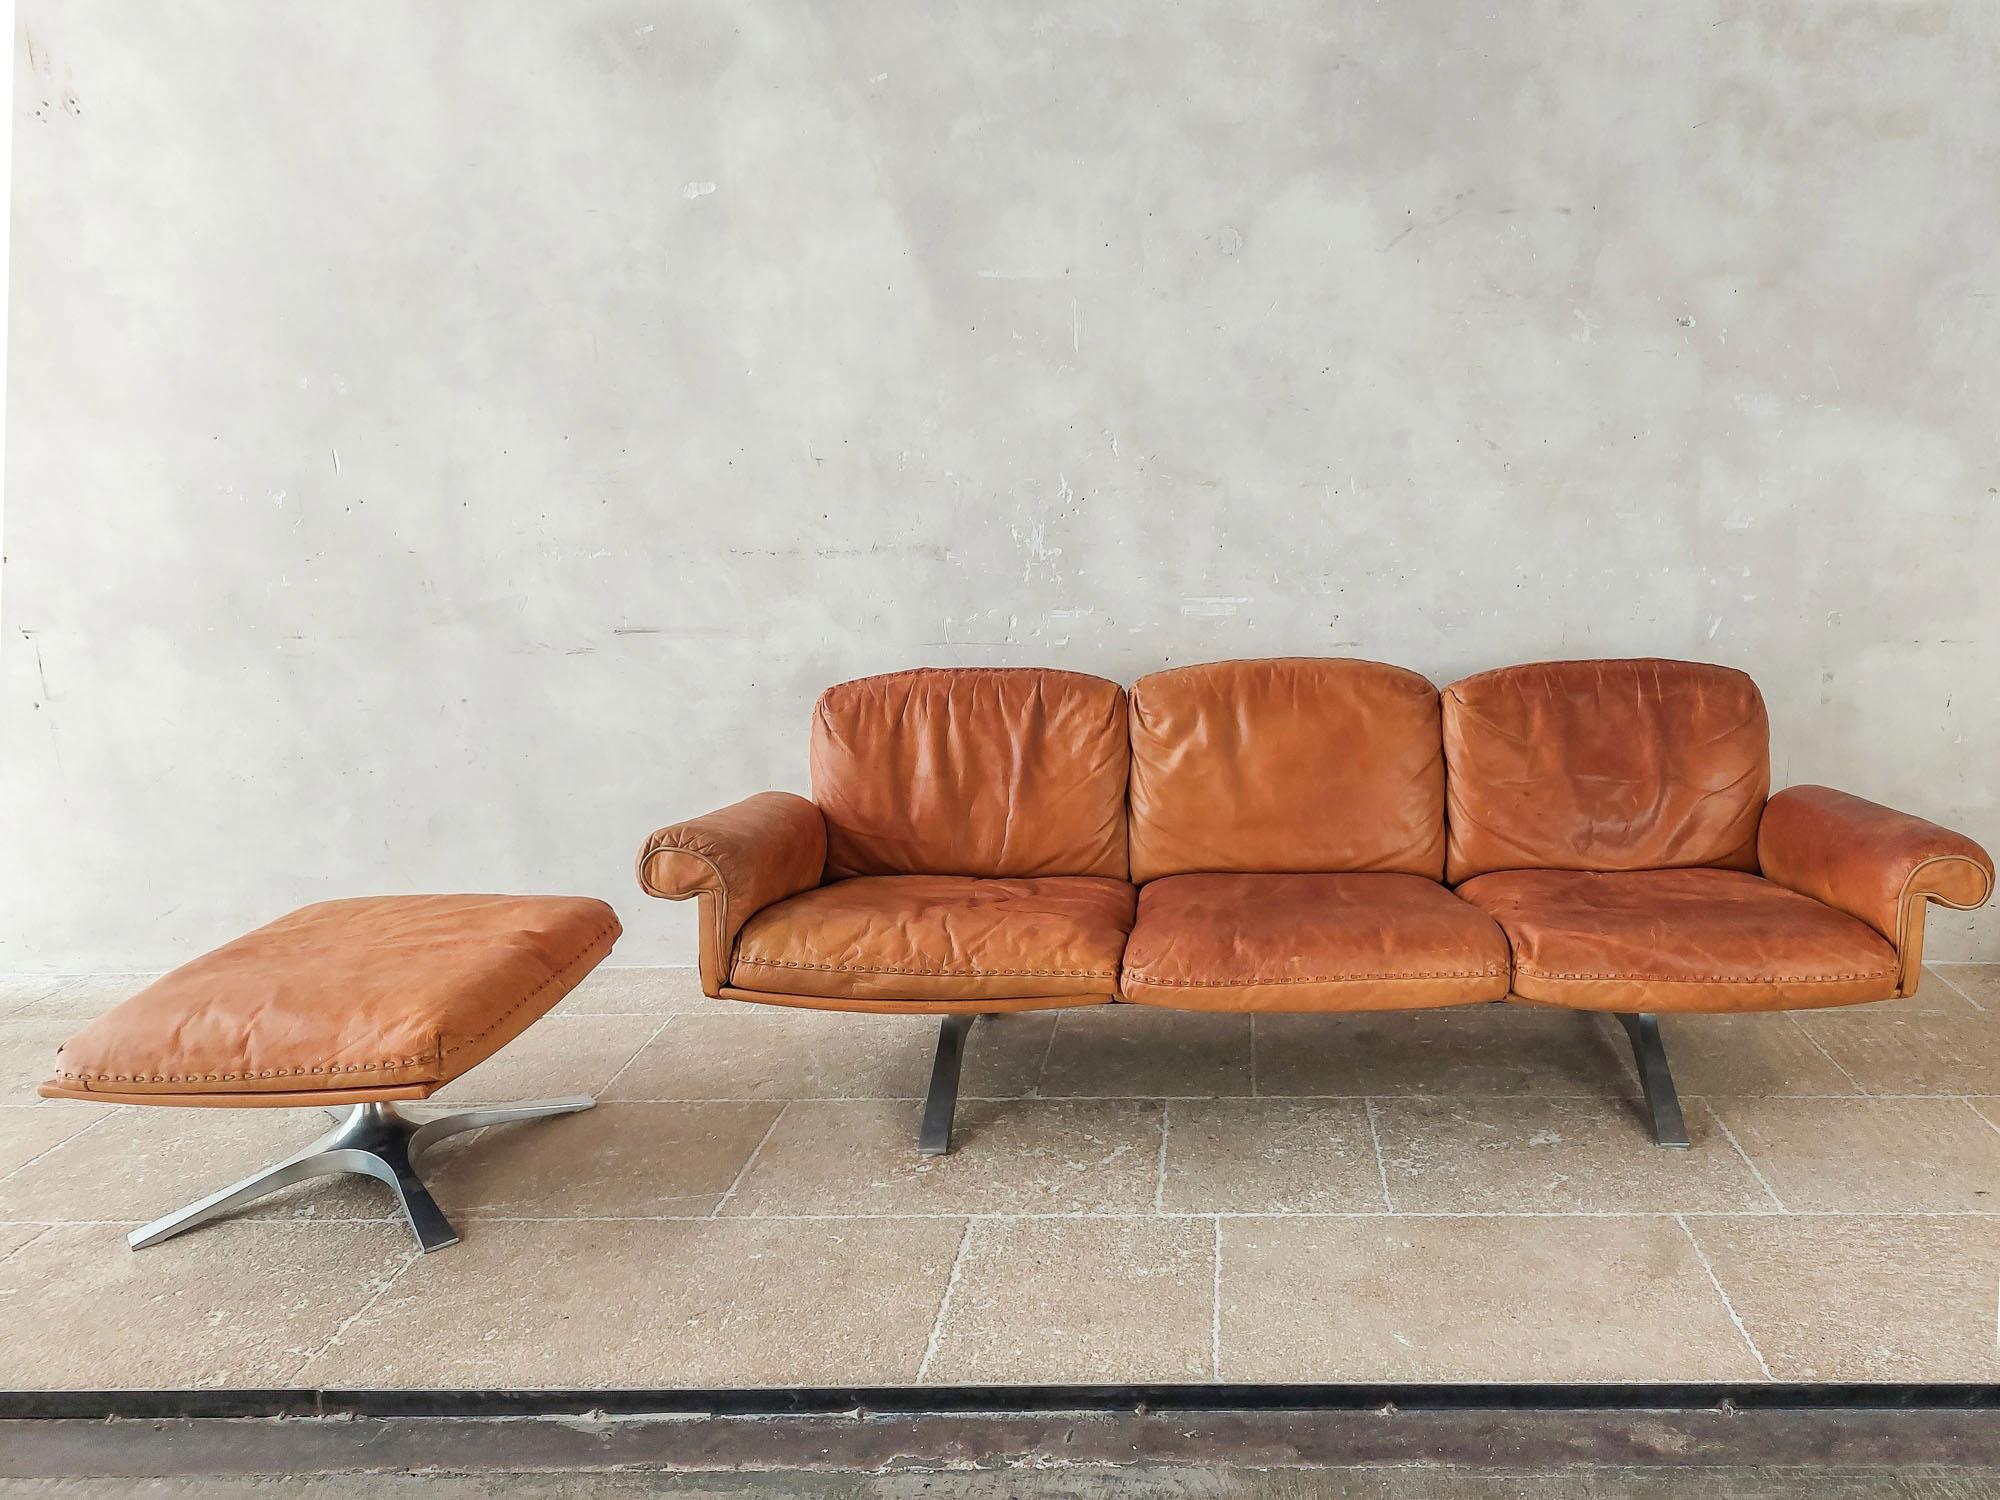 Vintage design sofa from De Sede, model DS31 with ottoman. A three-seater with hocker, in cognac-colored leather. Traces of wear and use consistent with age, see photos.

dimensions:

sofa: w 210 x d 75 x h 75 cm
seat height 40 cm

footstool: 60 x